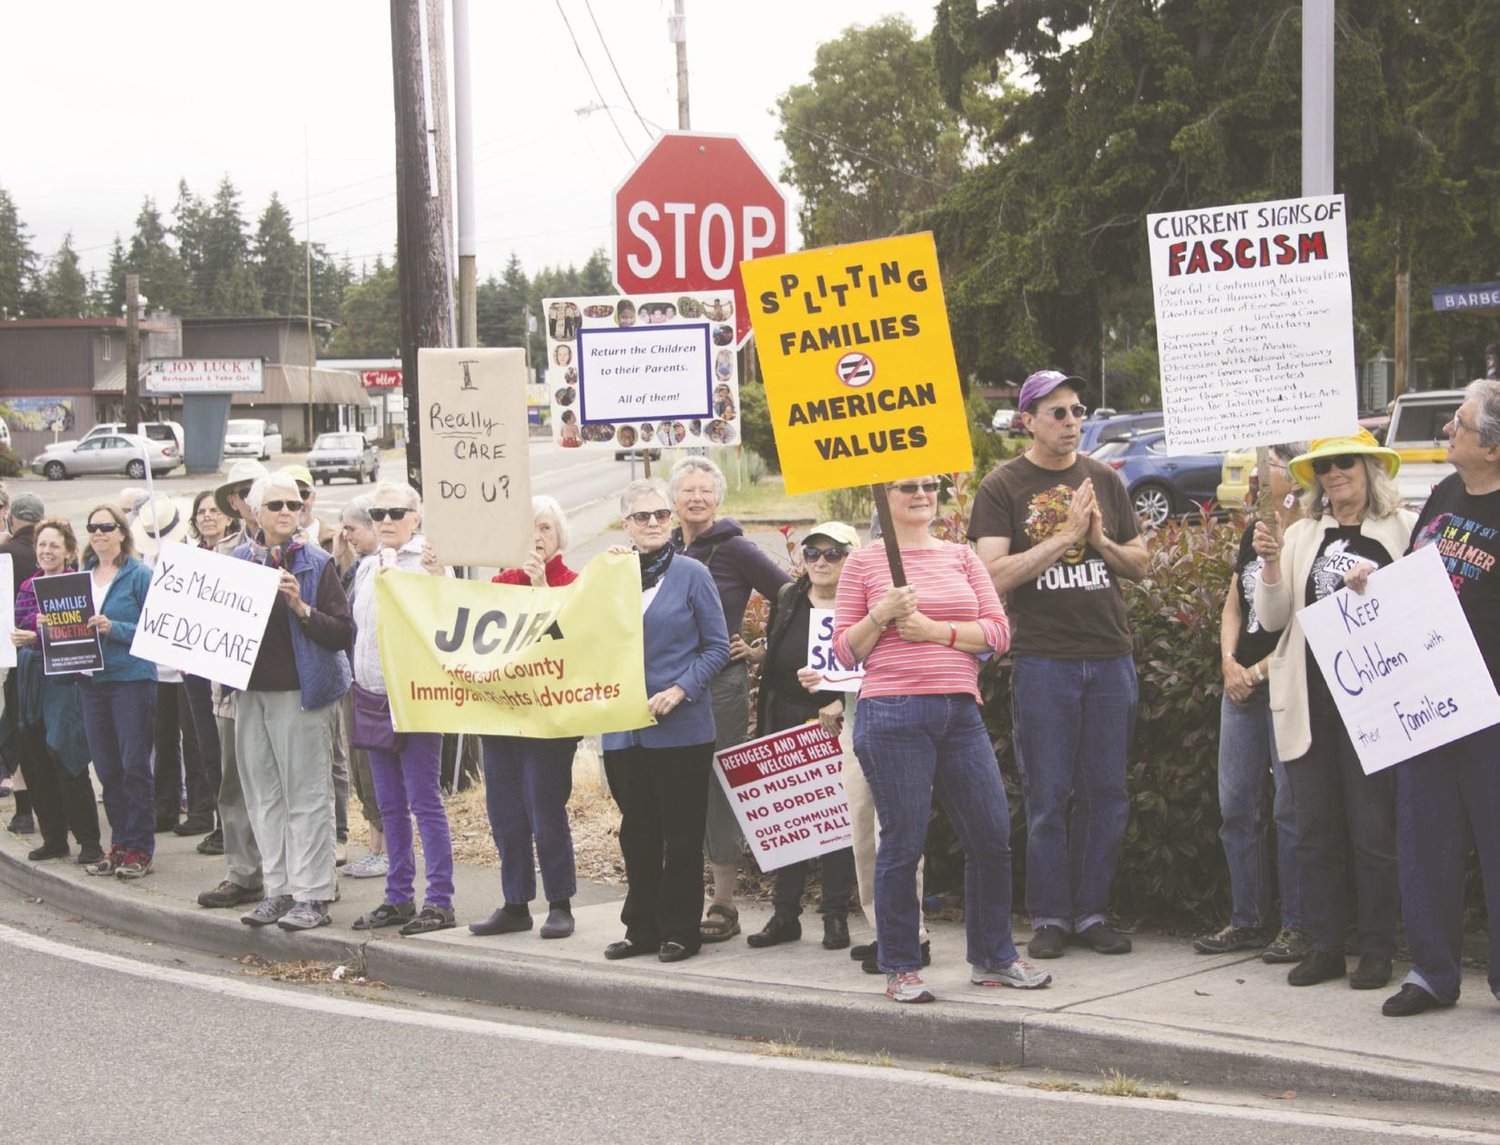 More than 250 protesters throng the intersection of Highway 116 and Irondale Road in Port Hadlock June 22, to express their objections to the Trump administration's policies toward detaining illegal migrant families.